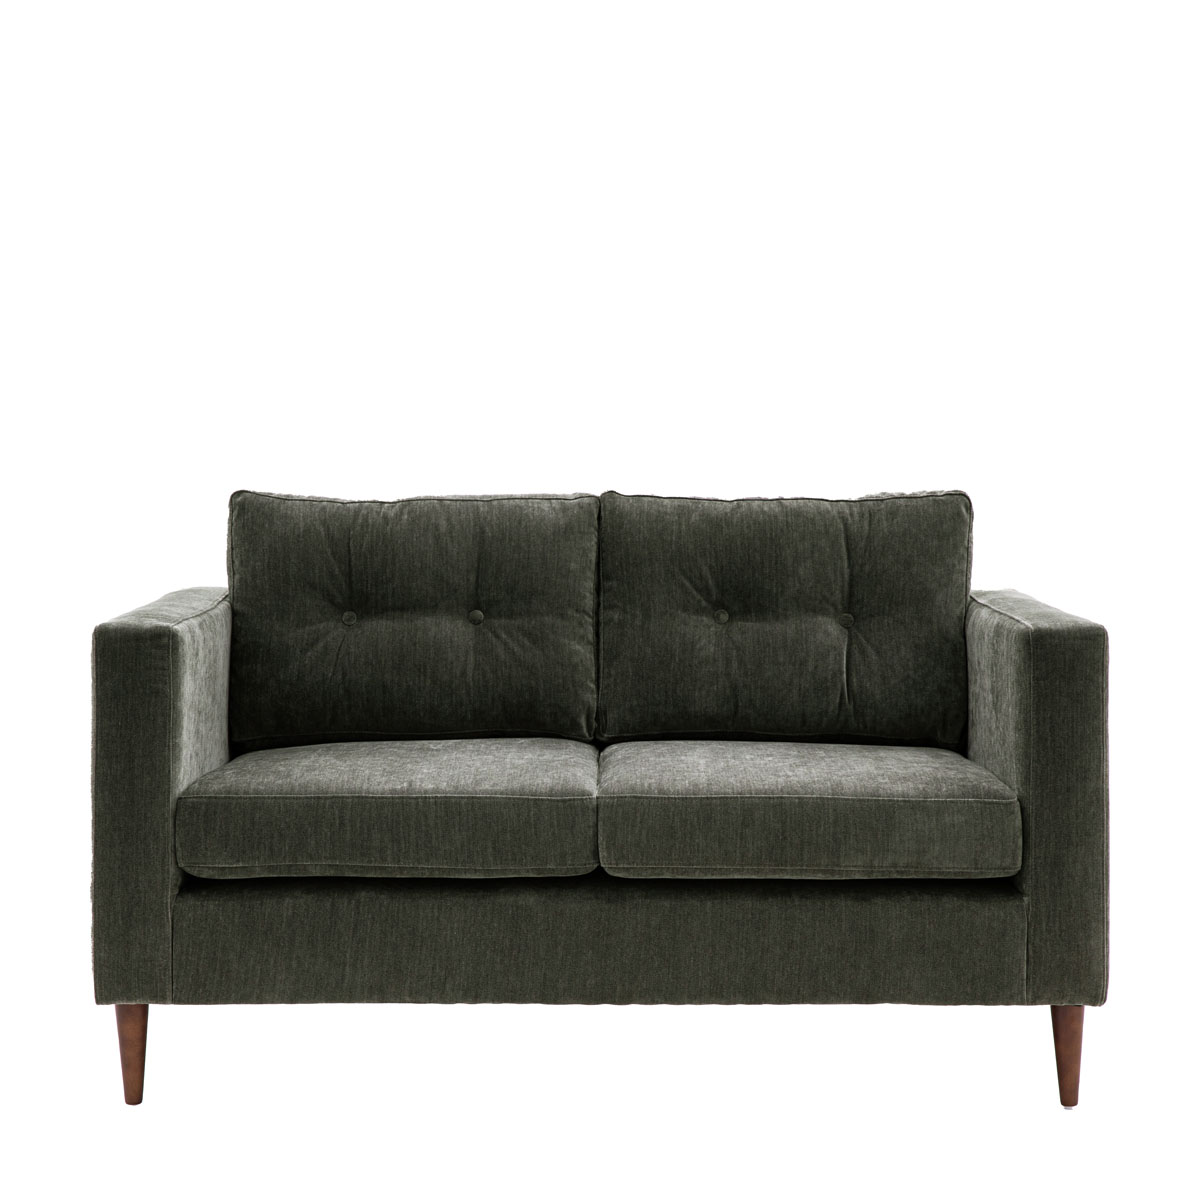 Whitwell Sofa 2 Seater Forest 1450x860x840mm